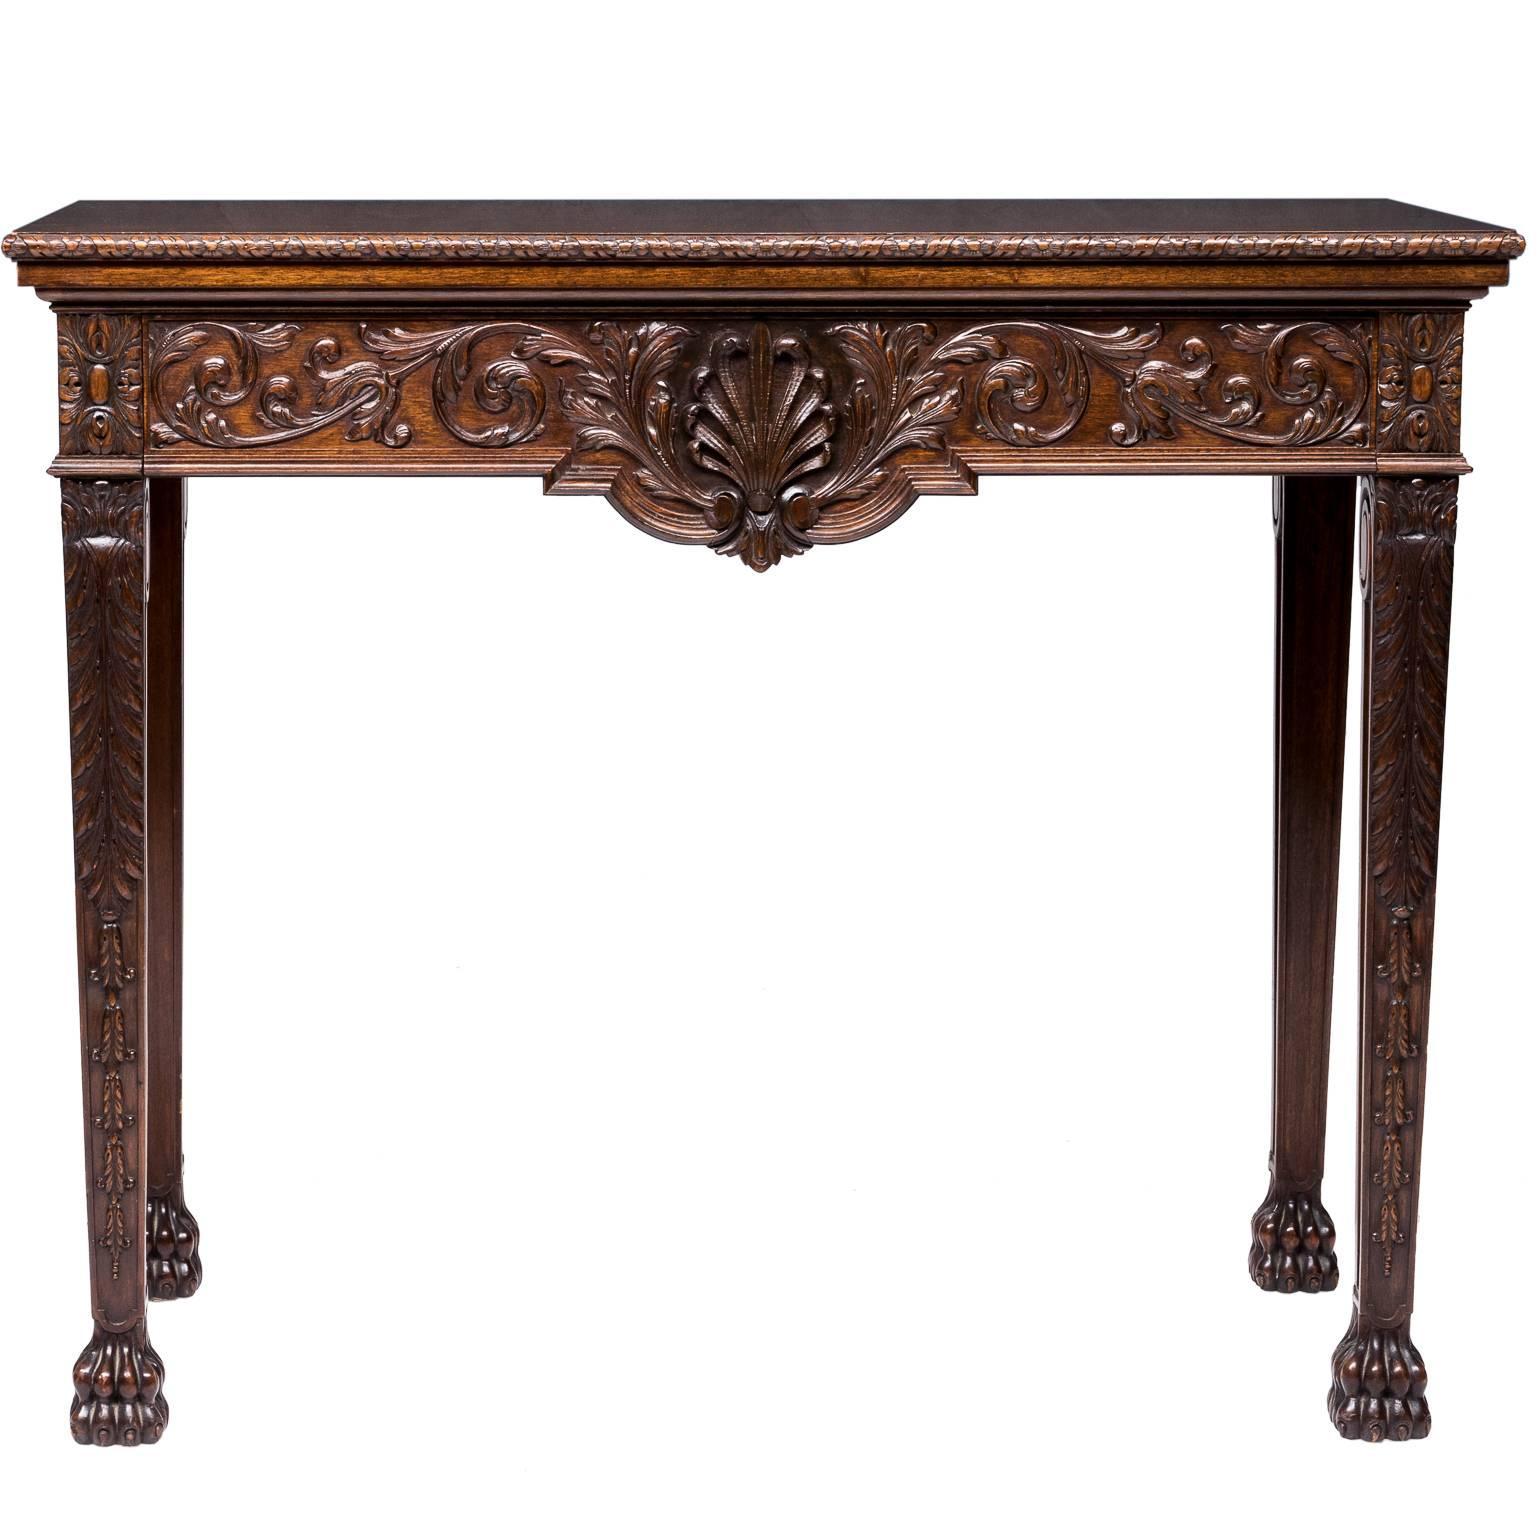 Victorian 19th Century William & Kent Style Console